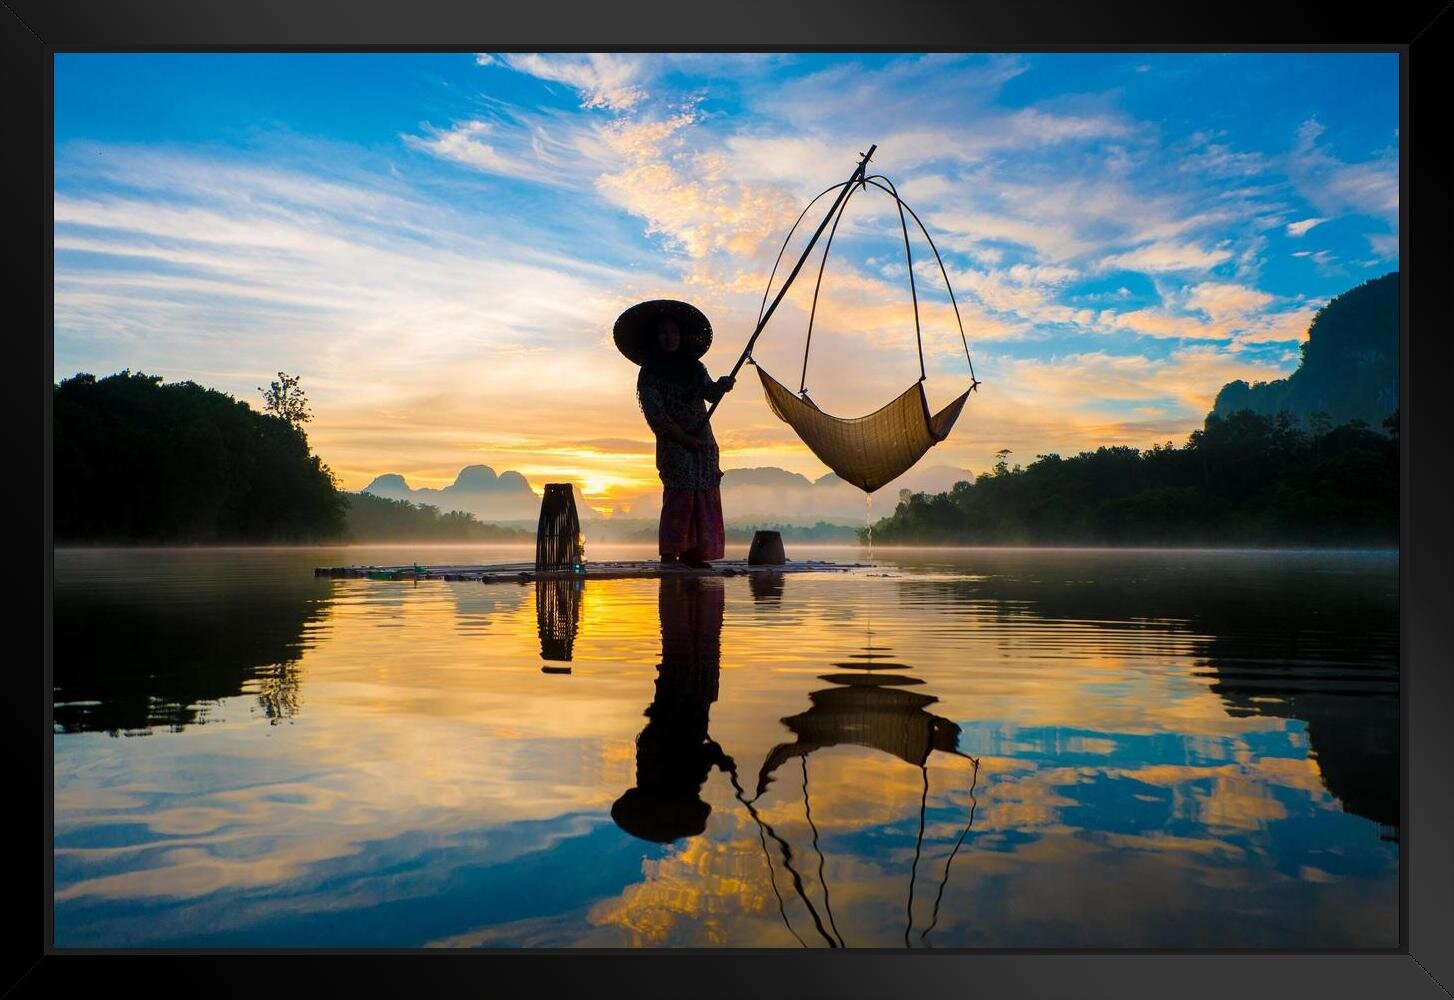 Fisherman On Raft With Fishing Nets In Asia Sky Reflecting On Lake Photo  Matted Framed Art Wall Decor 26x20 Framed On Paper Print